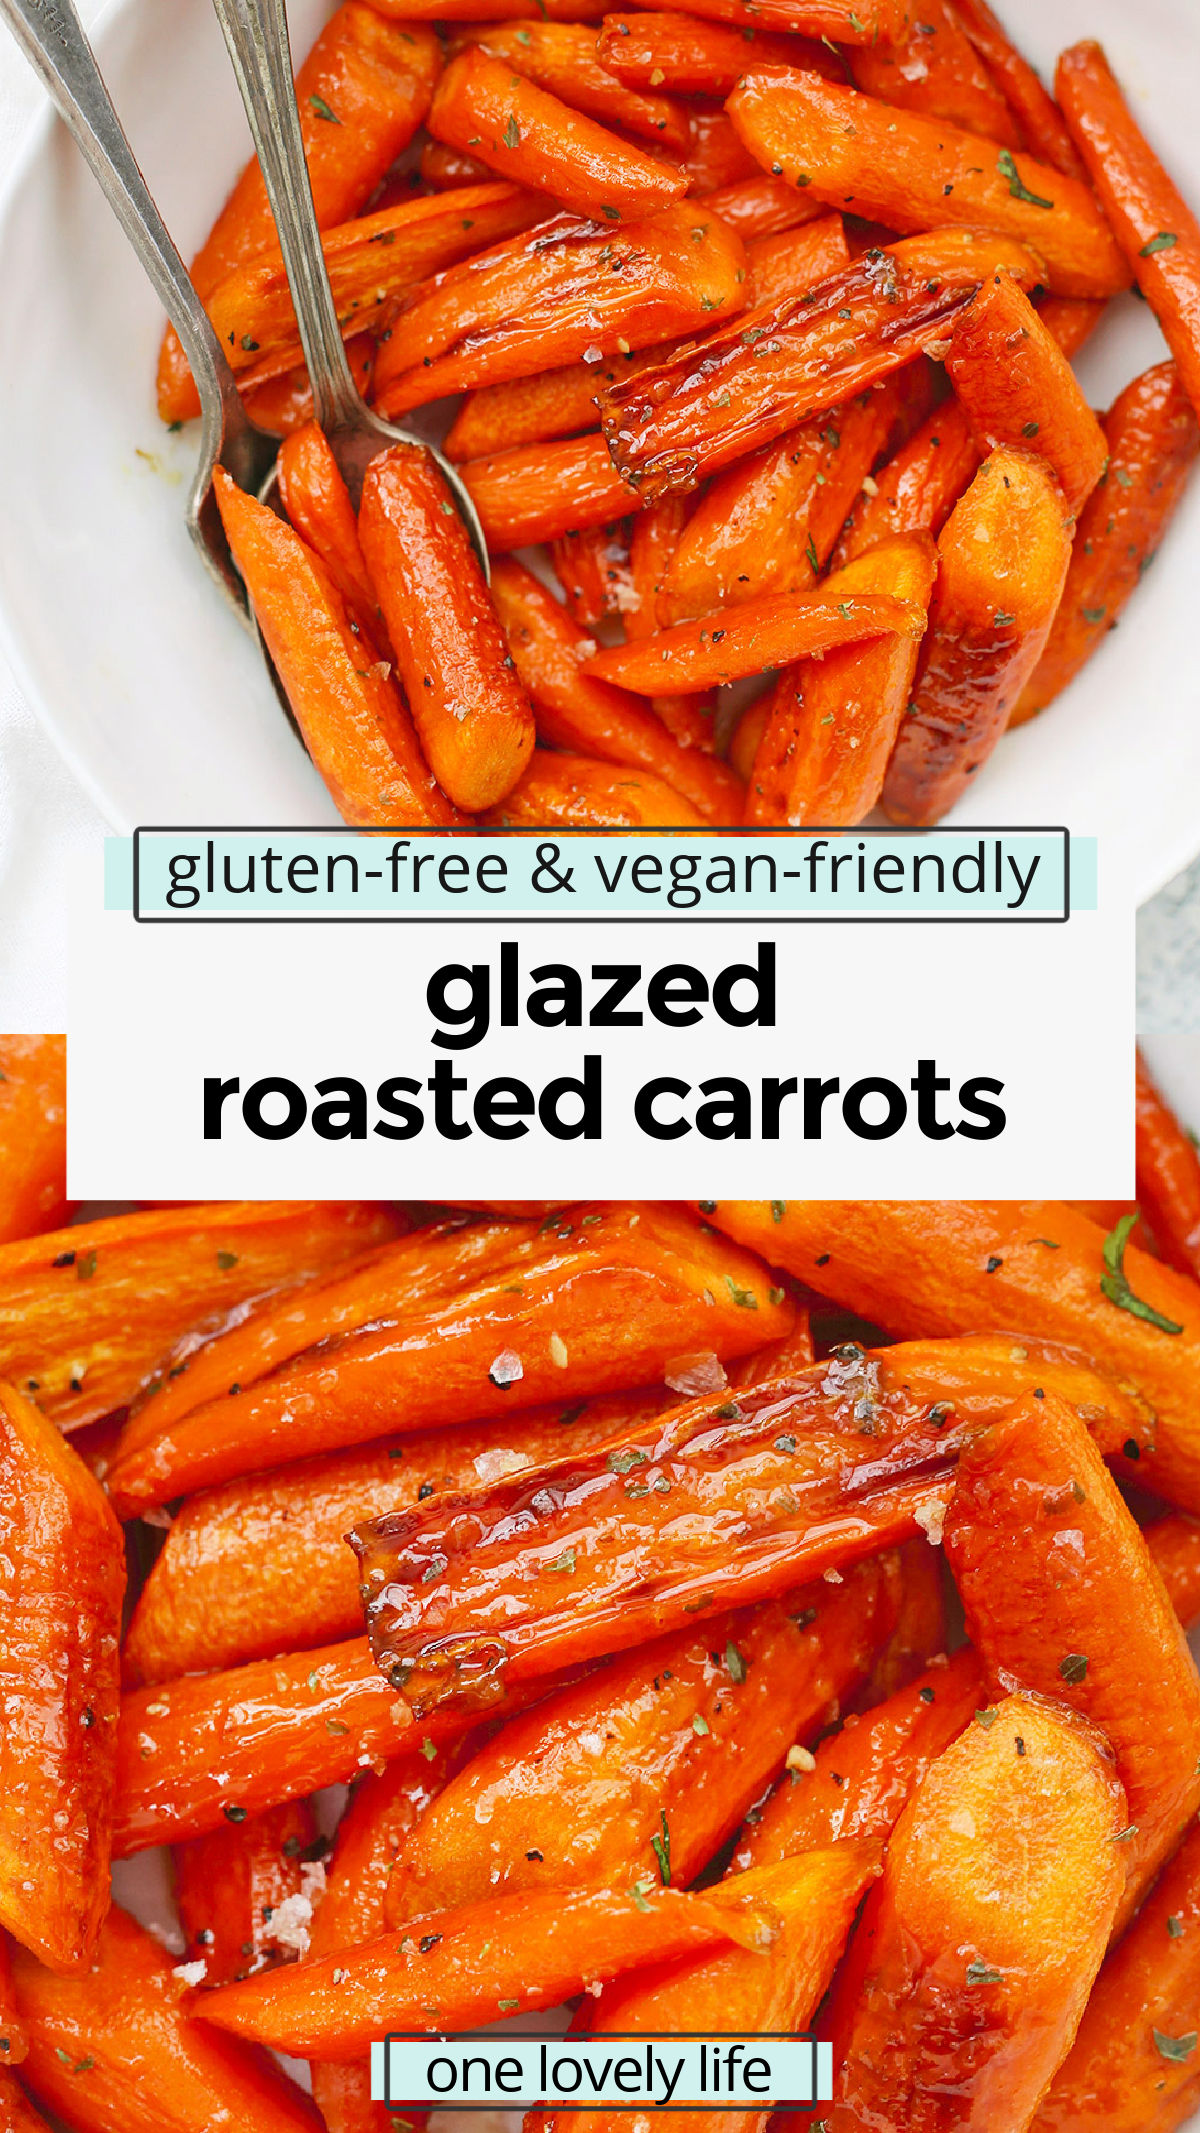 Maple Glazed Roasted Carrots - This is the BEST roasted carrots recipe! Sweet-glazed carrots with gorgeous caramelized edges make the perfect side dish. (Gluten-Free, Paleo & Vegan-Friendly) // Paleo Side Dish // Holiday Side Dish // Glazed Carrots // Roasted Carrots // Maple Glazed Carrots // Easter Side Dish // Vegan Glazed Carrots // Paleo Glazed Carrots // Vegan Thanksgiving // Paleo Thanskgiving // Healthy Thanksgiving